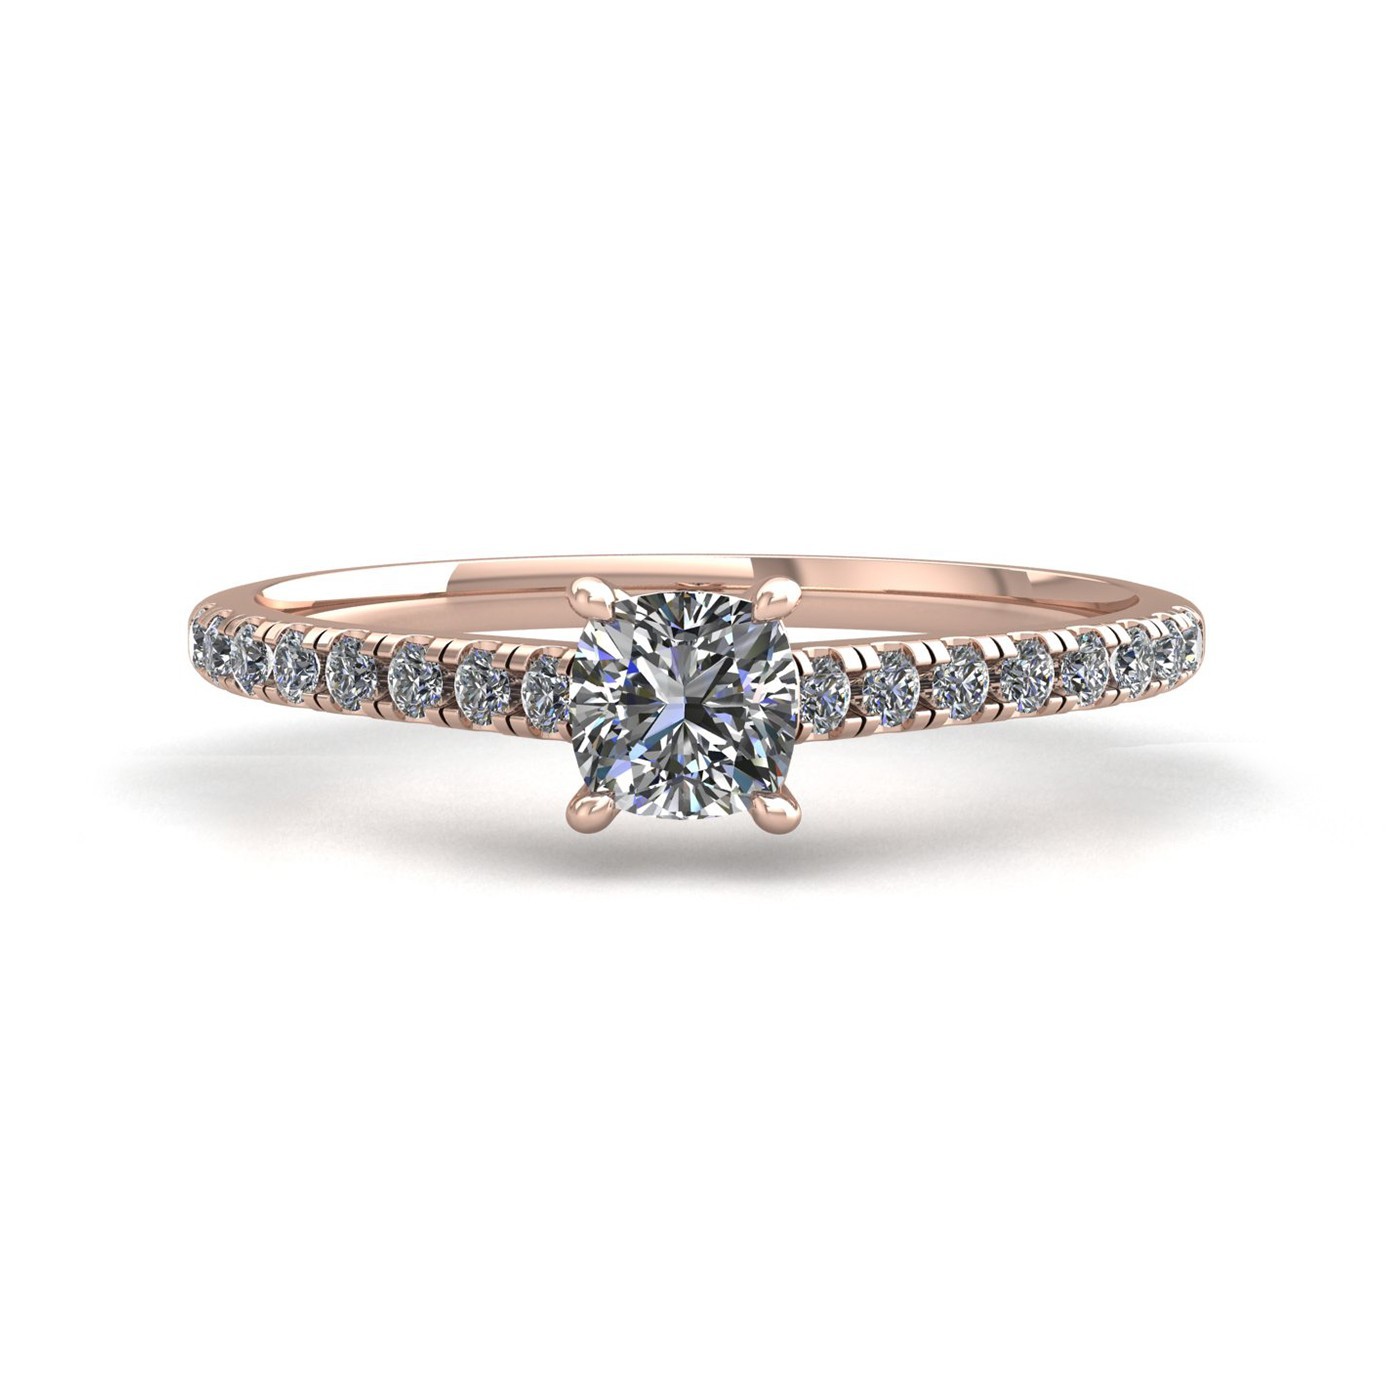 18k rose gold 2.5ct 4 prongs cushion cut diamond engagement ring with whisper thin pavÉ set band Photos & images